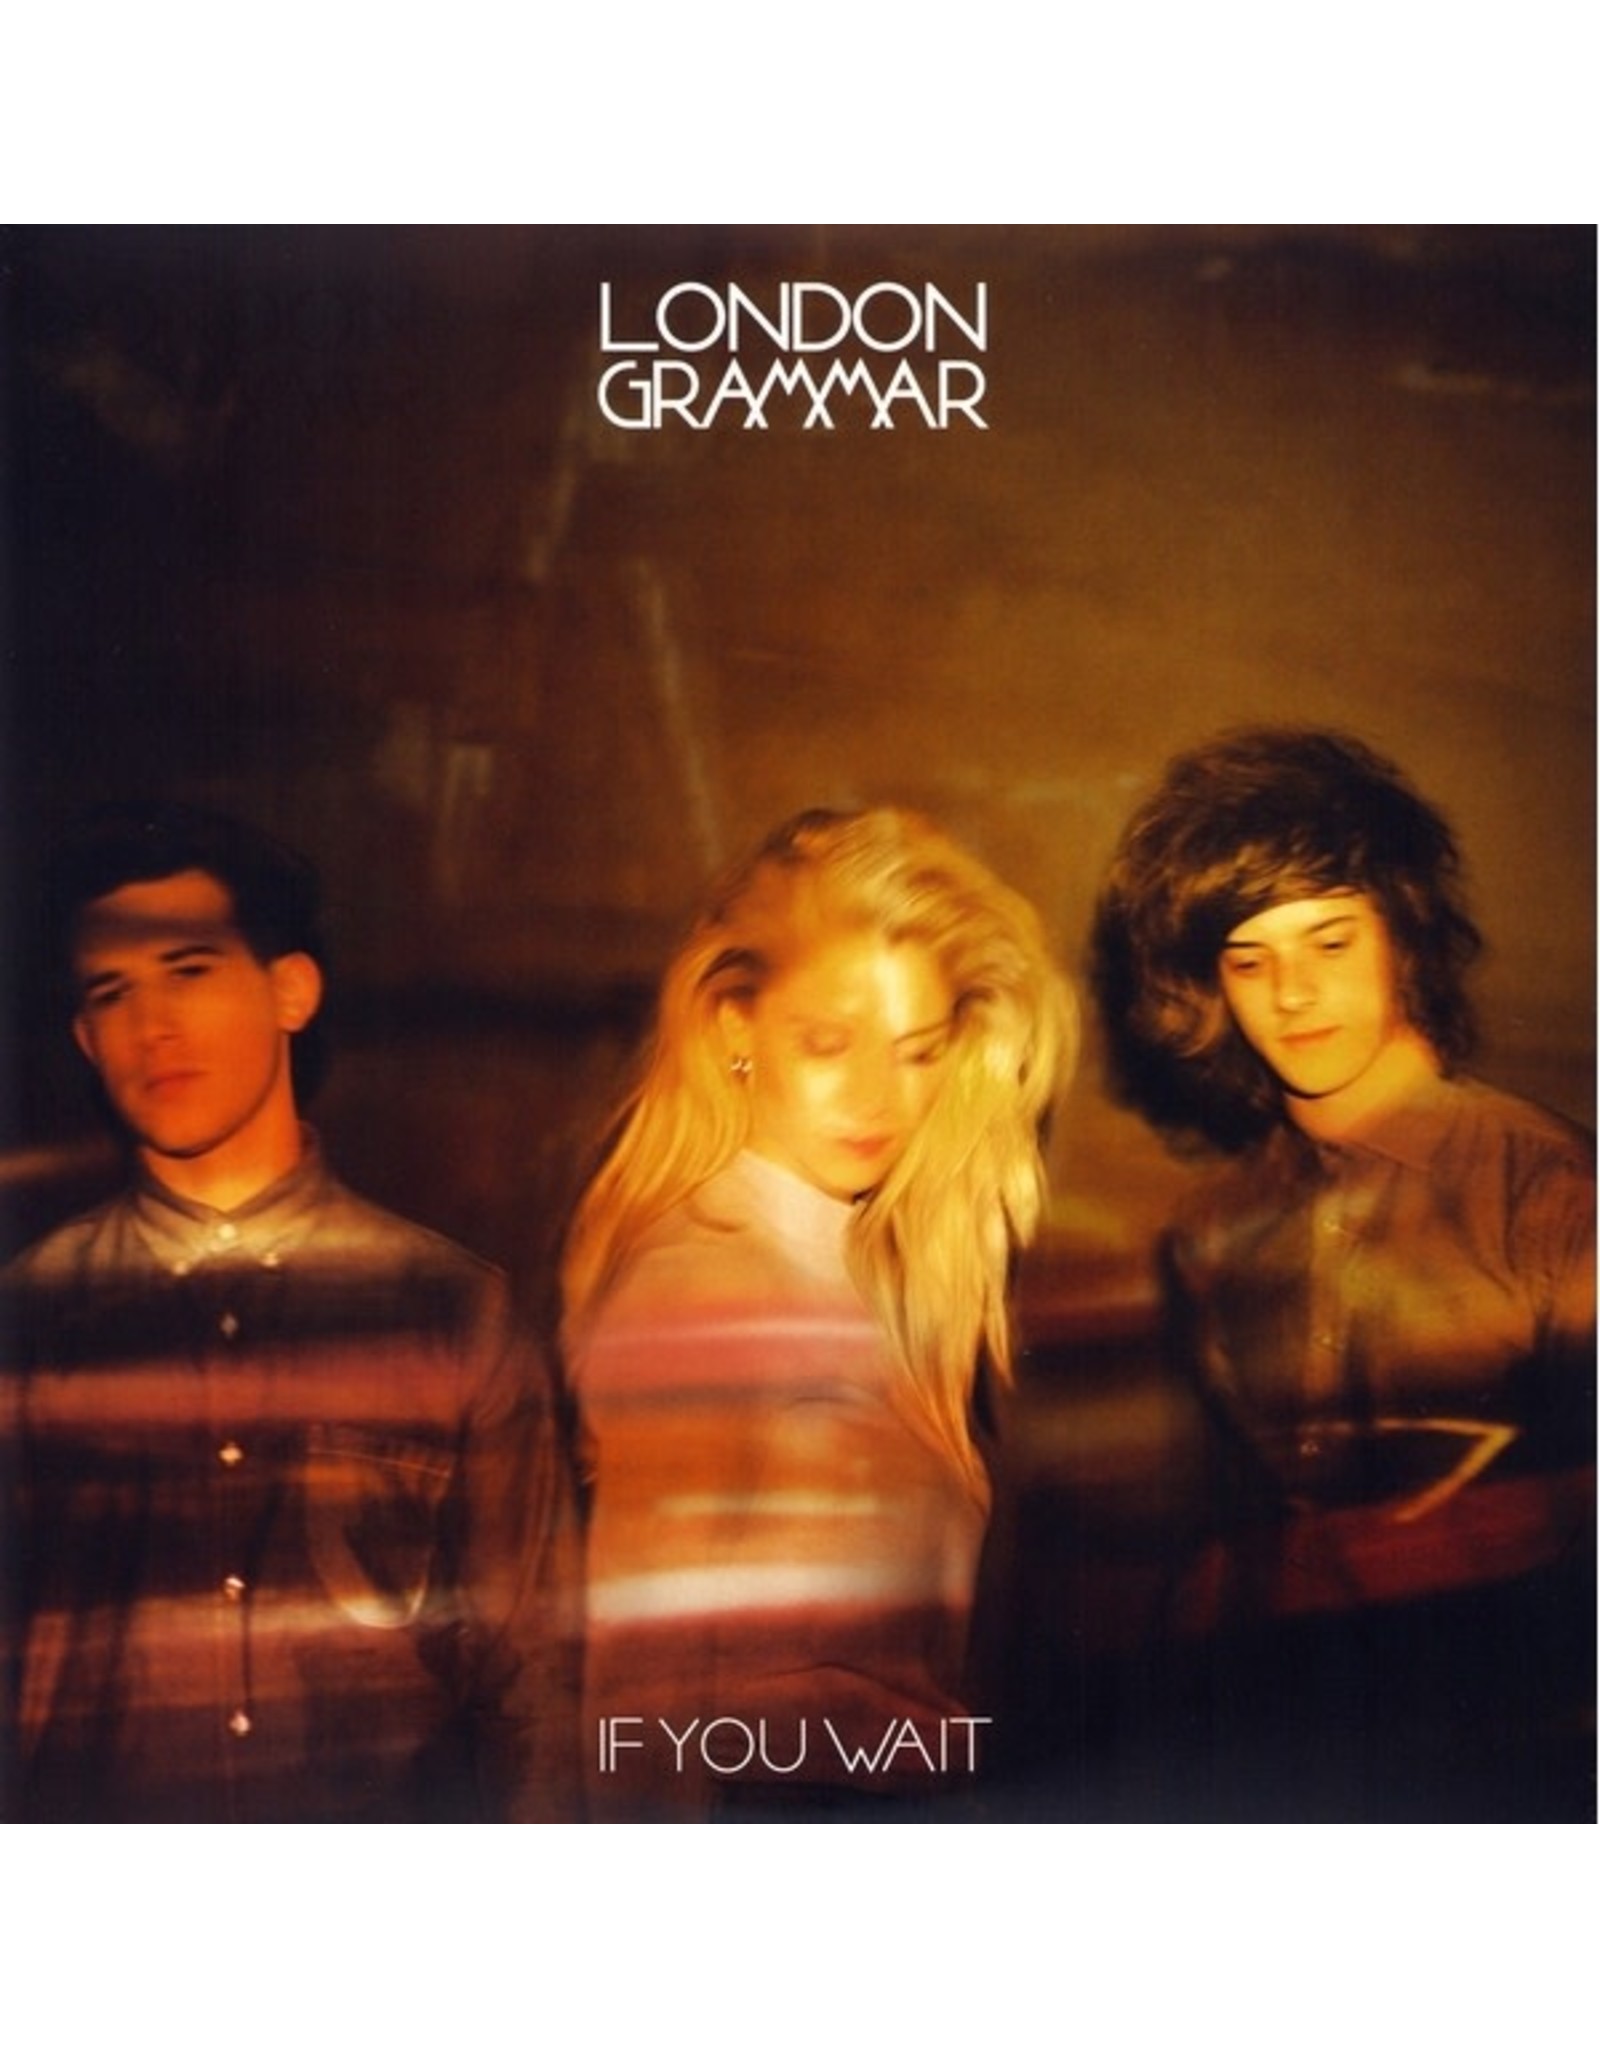 London Grammar - If You Wait (Deluxe Edition)